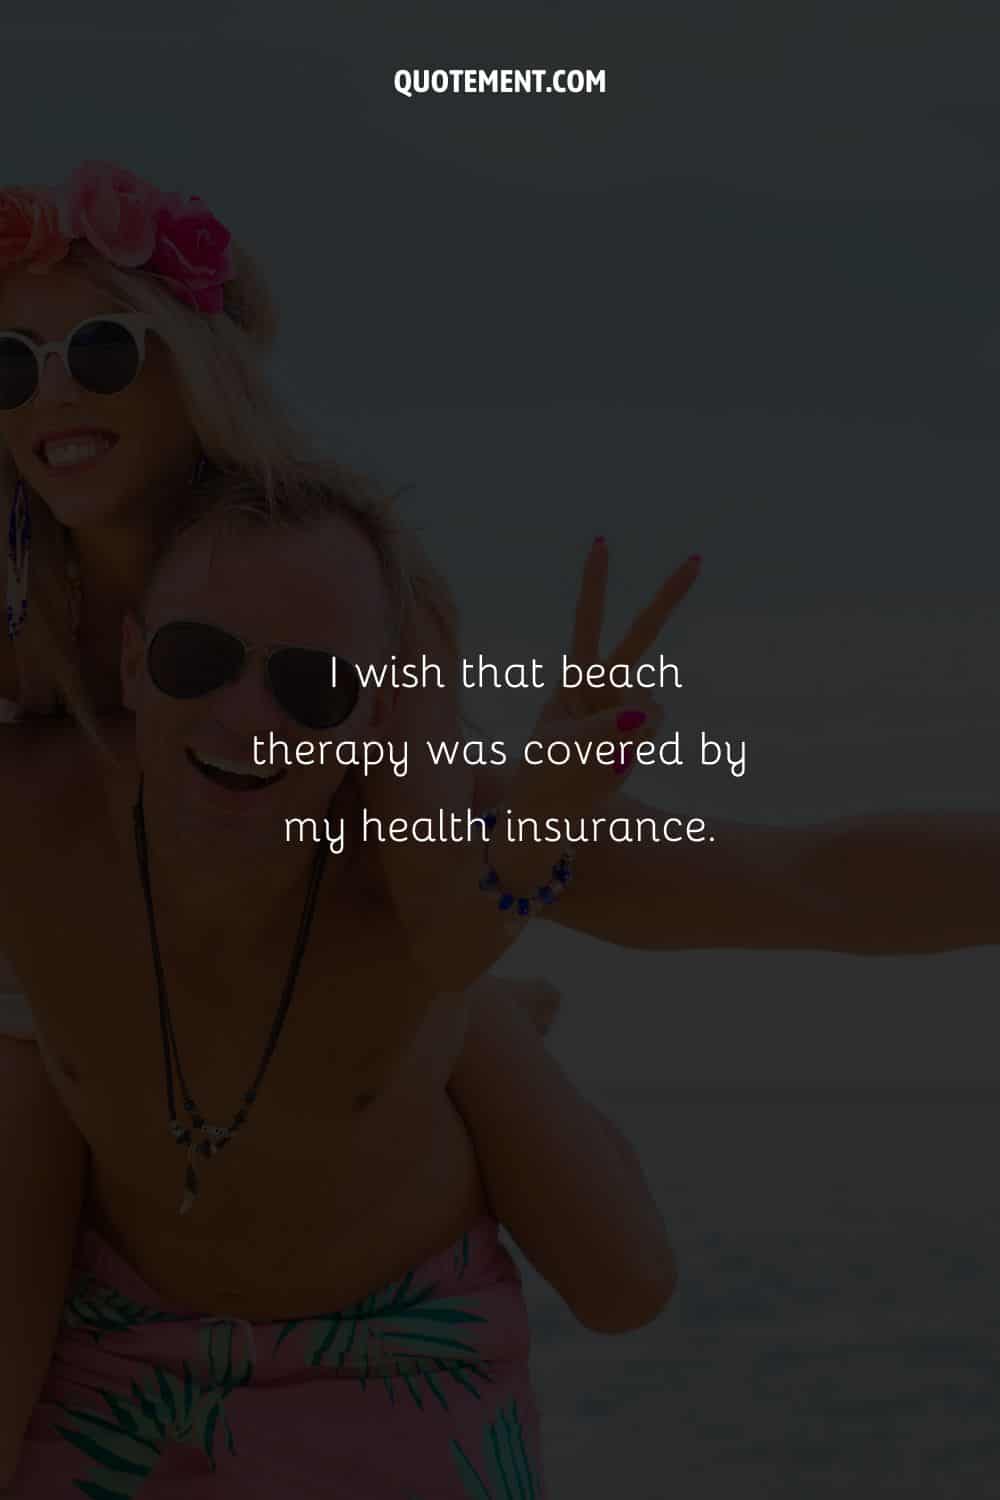 I wish that beach therapy was covered by my health insurance.